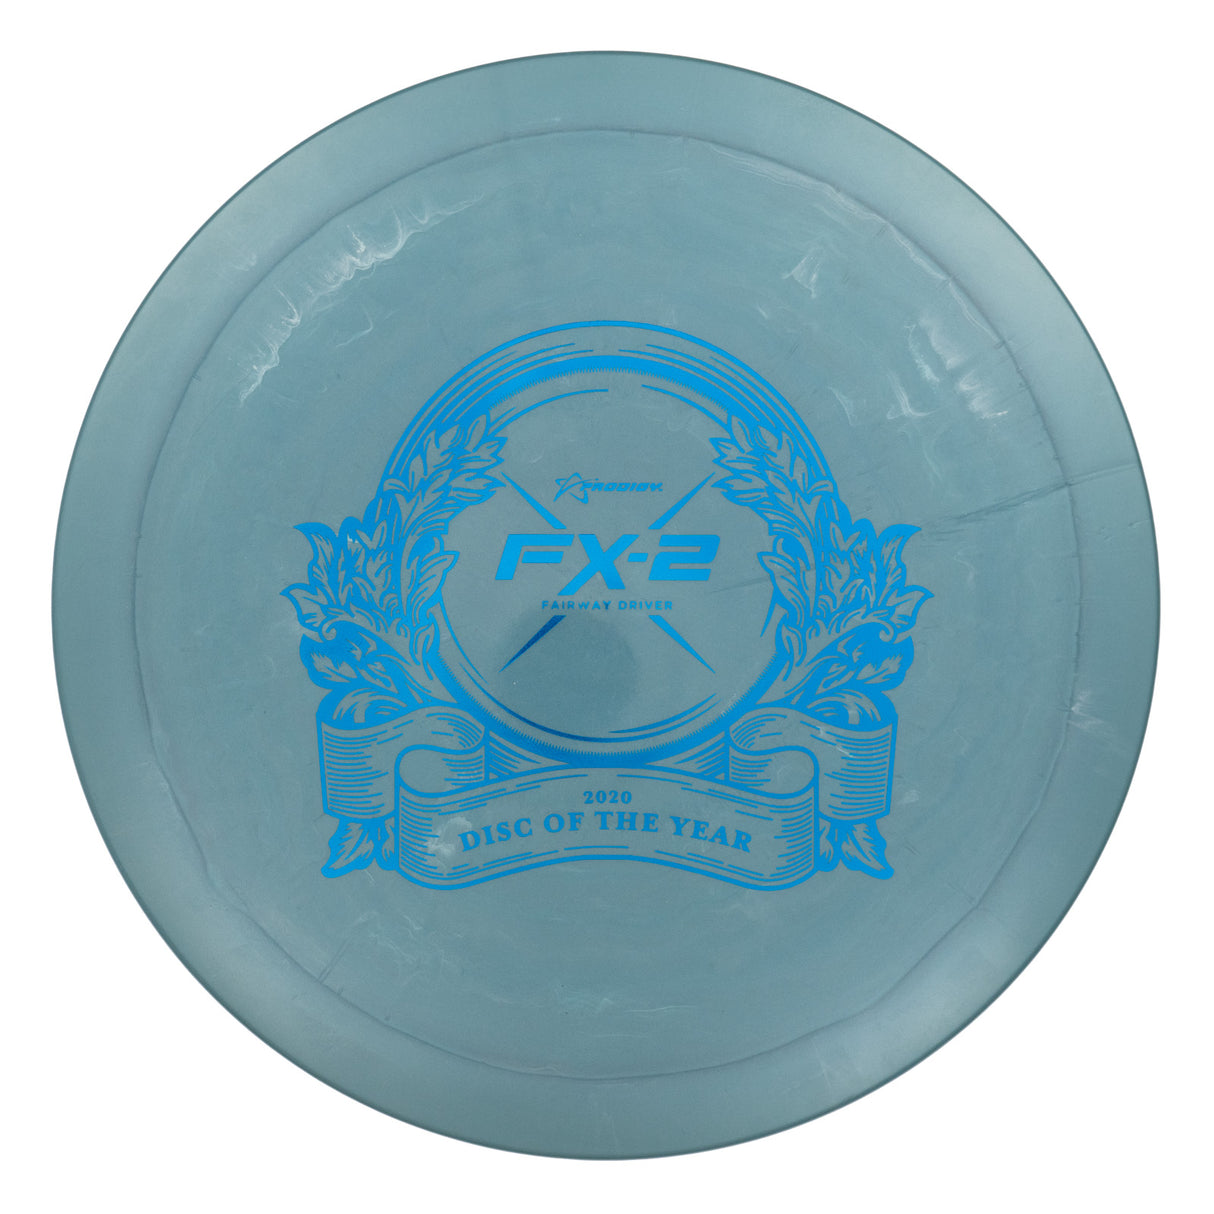 Prodigy FX-2 - 2020 Disc of the Year 500 170g | Style 0001